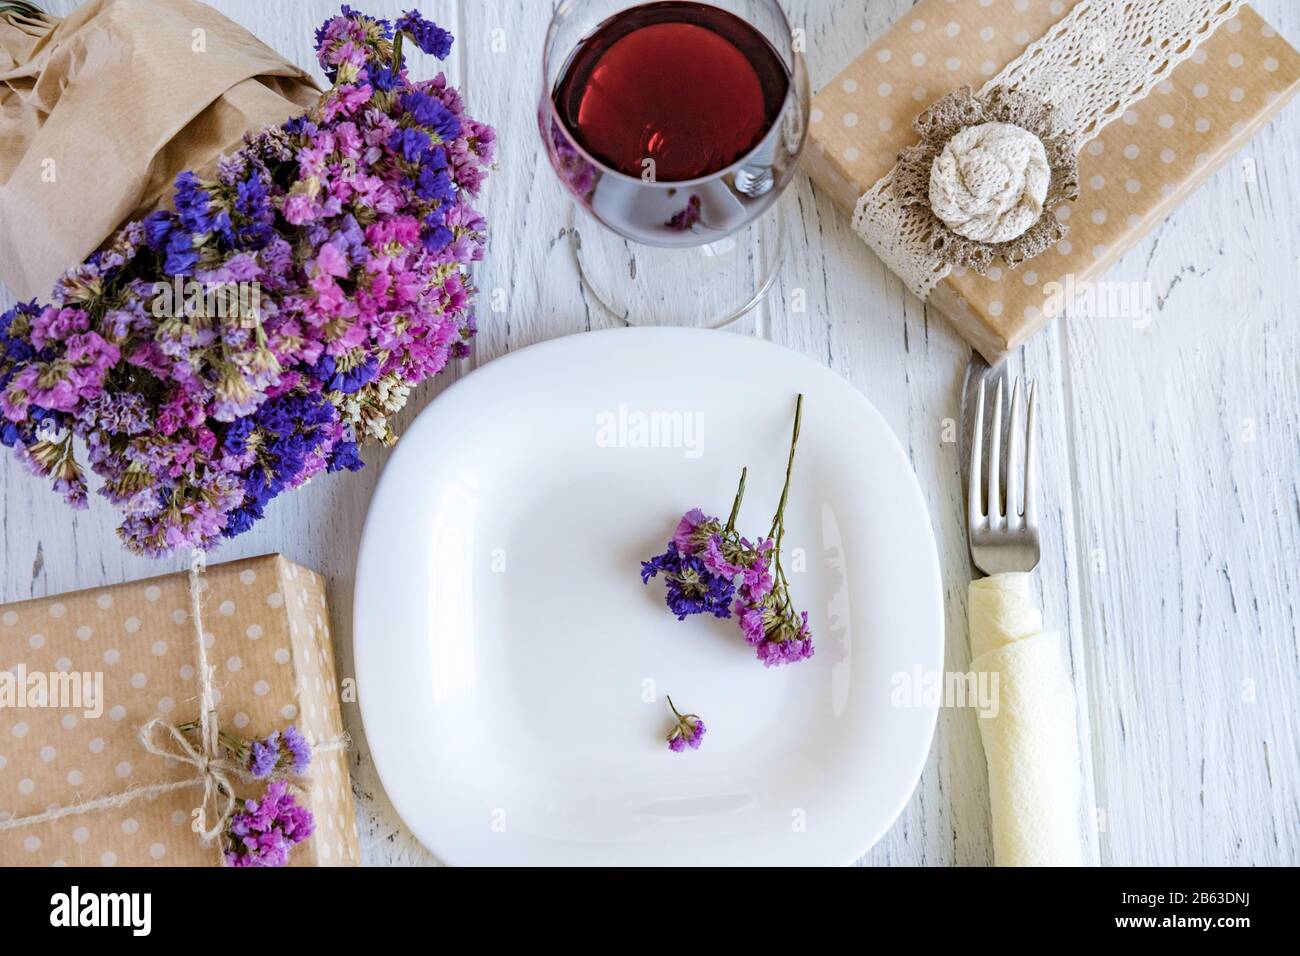 Table setting. Plate on wooden background with gift box, cutlery, a glass of red wine and flowers. Stock Photo